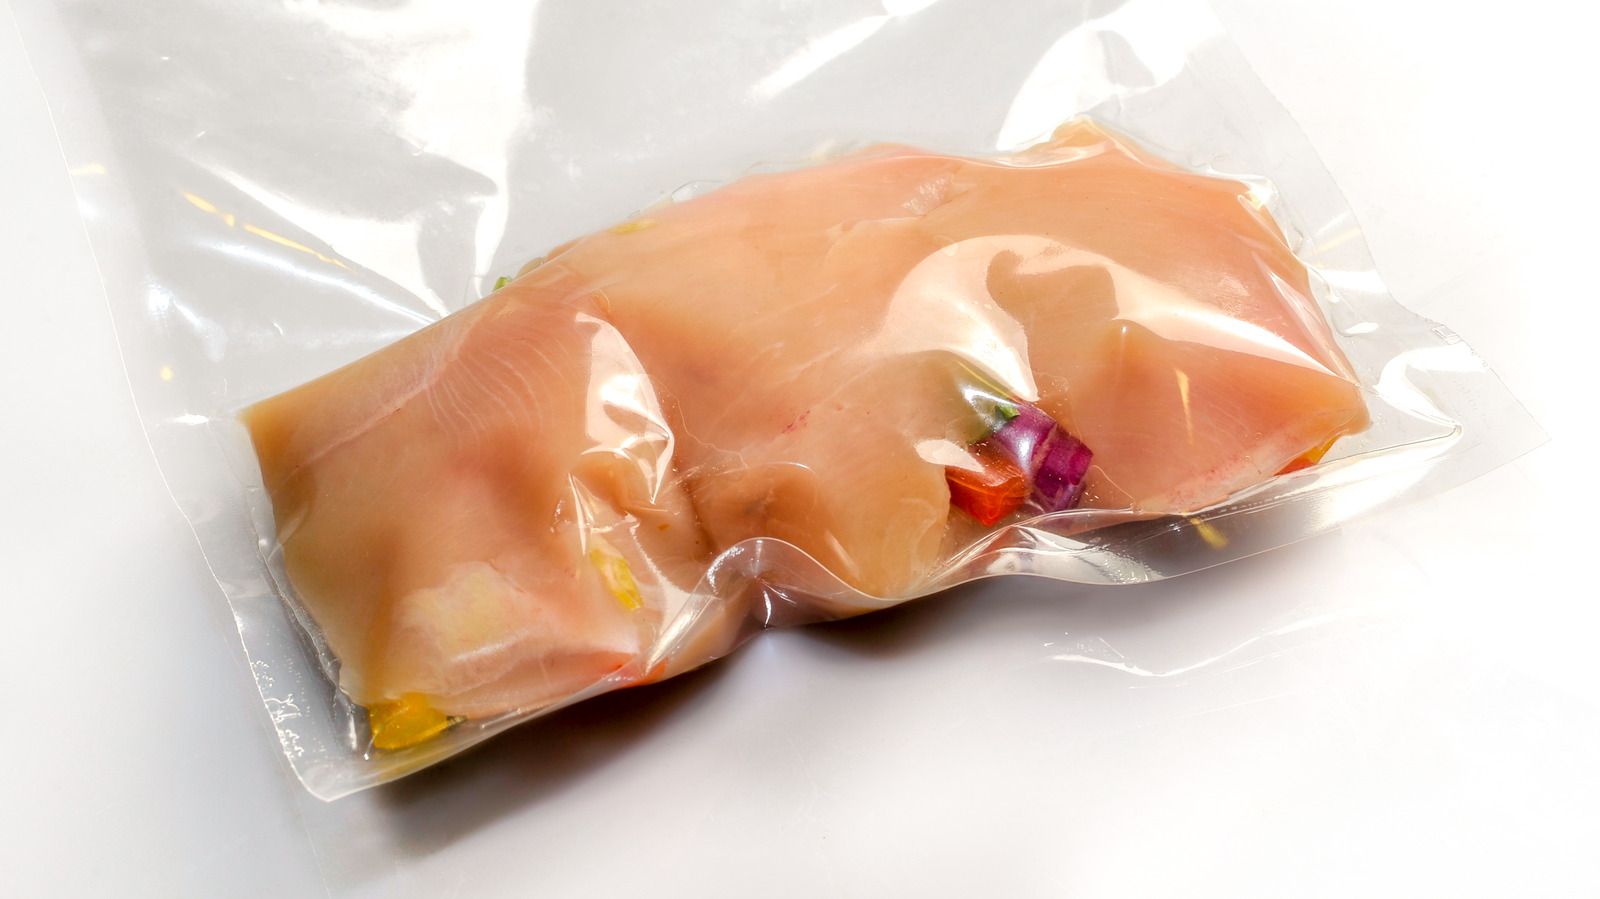 Is it Safe to Sous Vide in Any Plastic Bag?